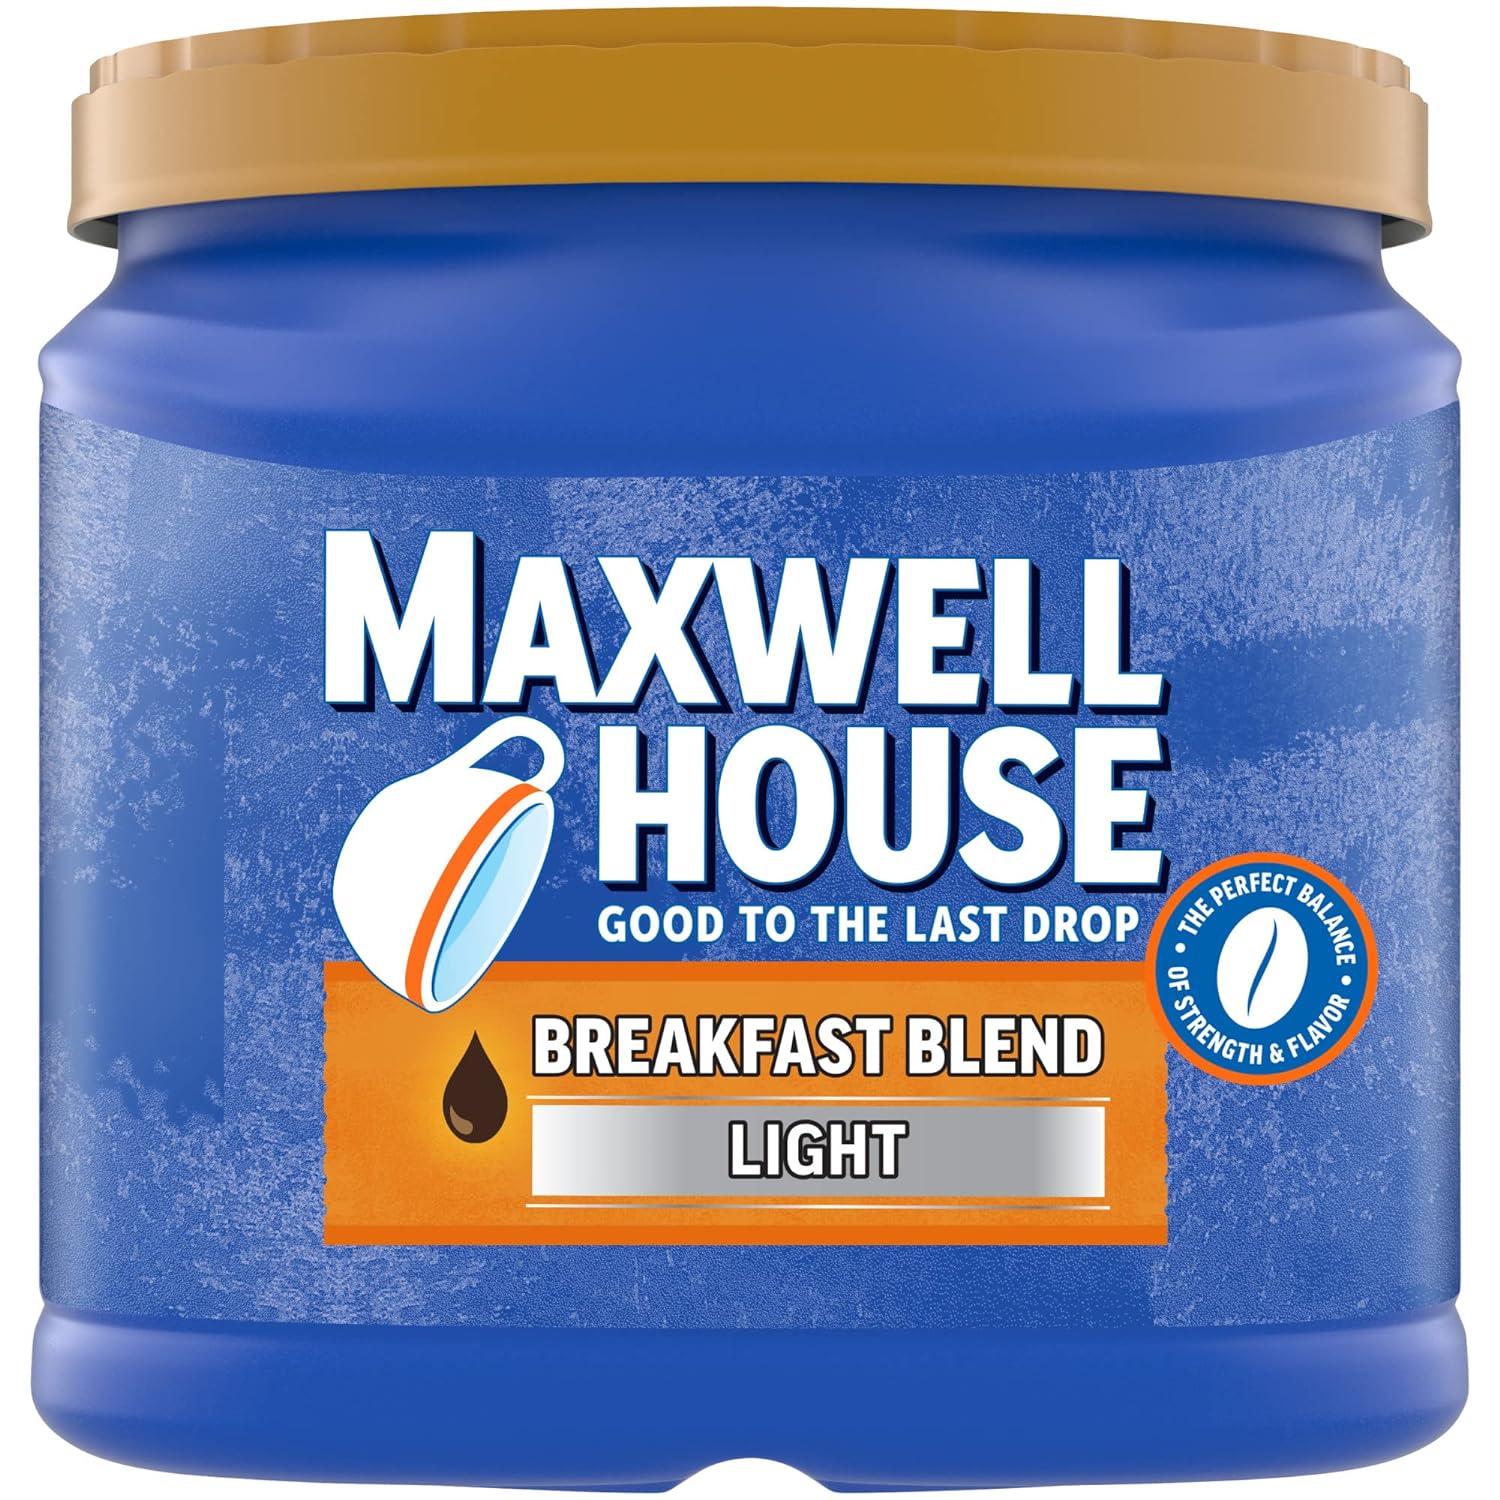 I've purchased this Maxwell House coffee multiple times here on Amazon. The price is better than it is in my local supermarkets. Always fresh, and makes the perfect cup of coffee.